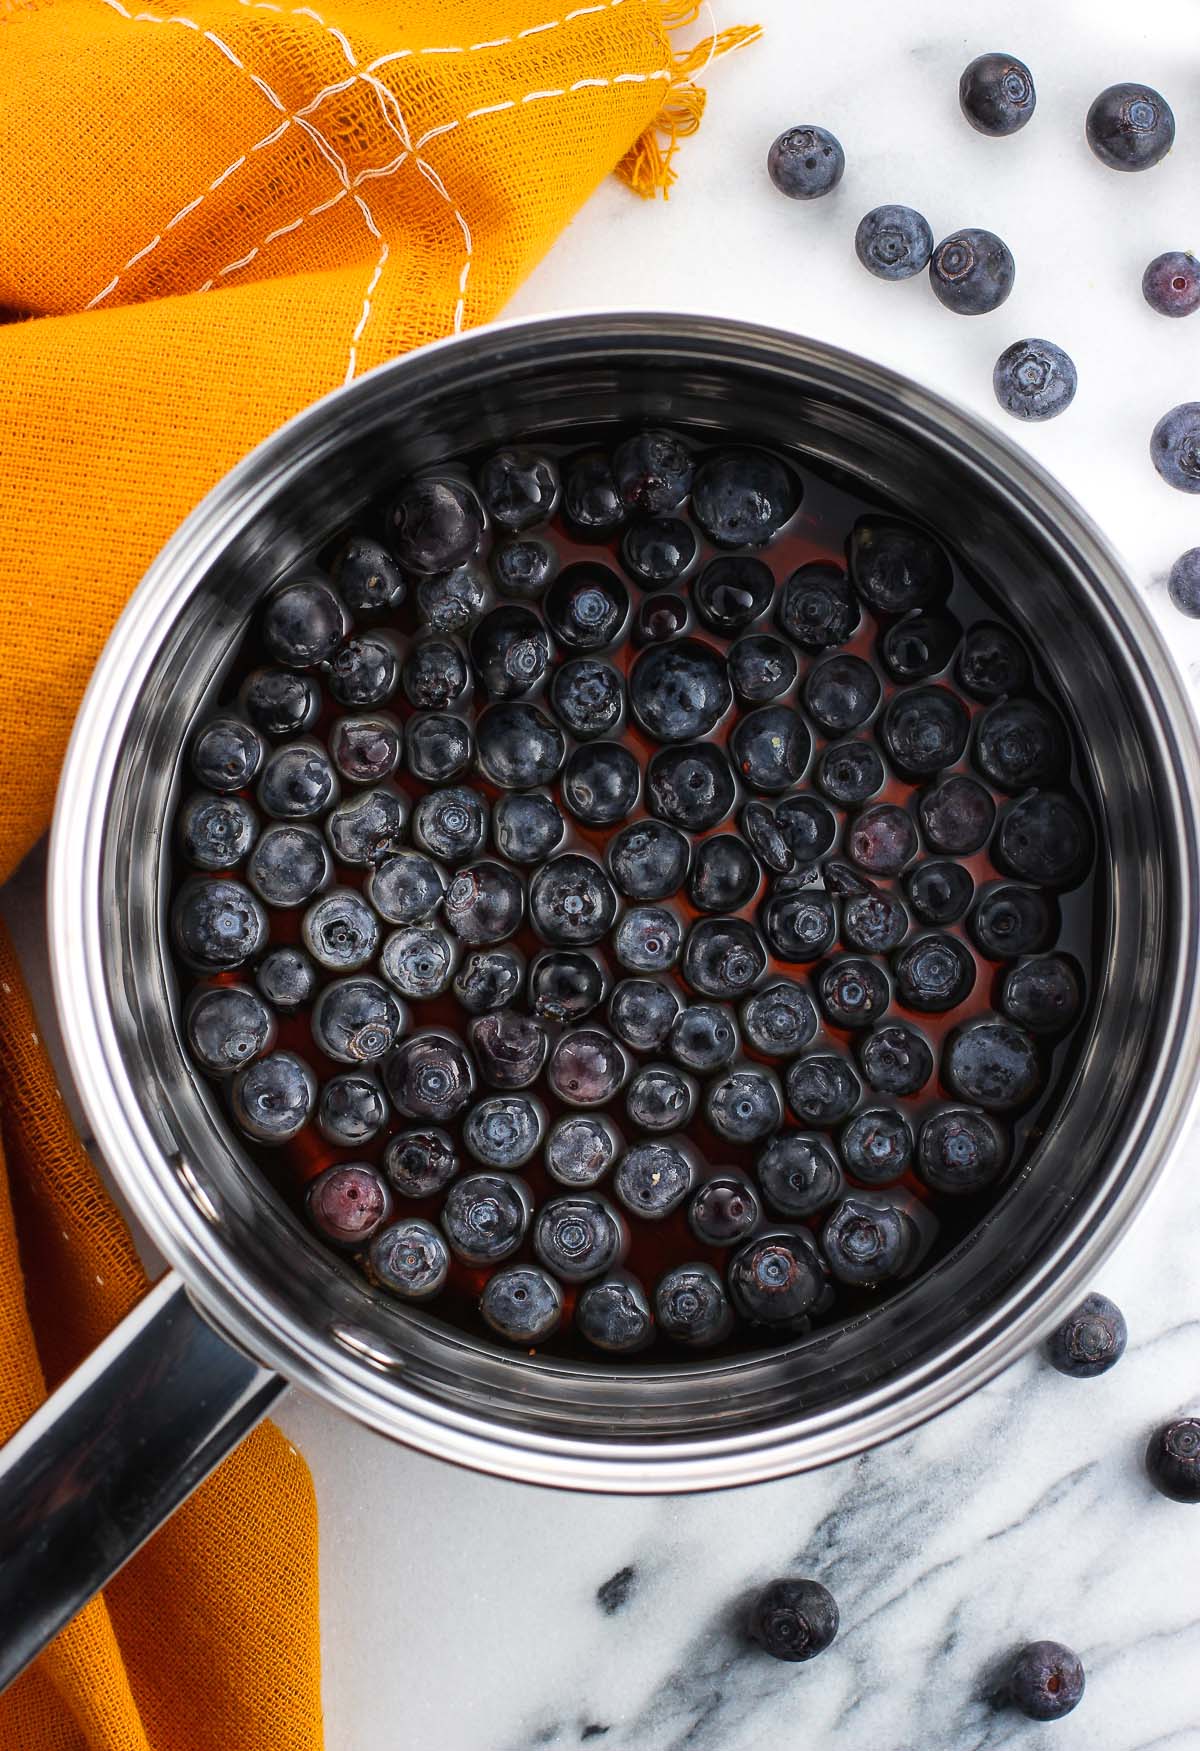 Whole blueberries in a saucepan of maple syrup.